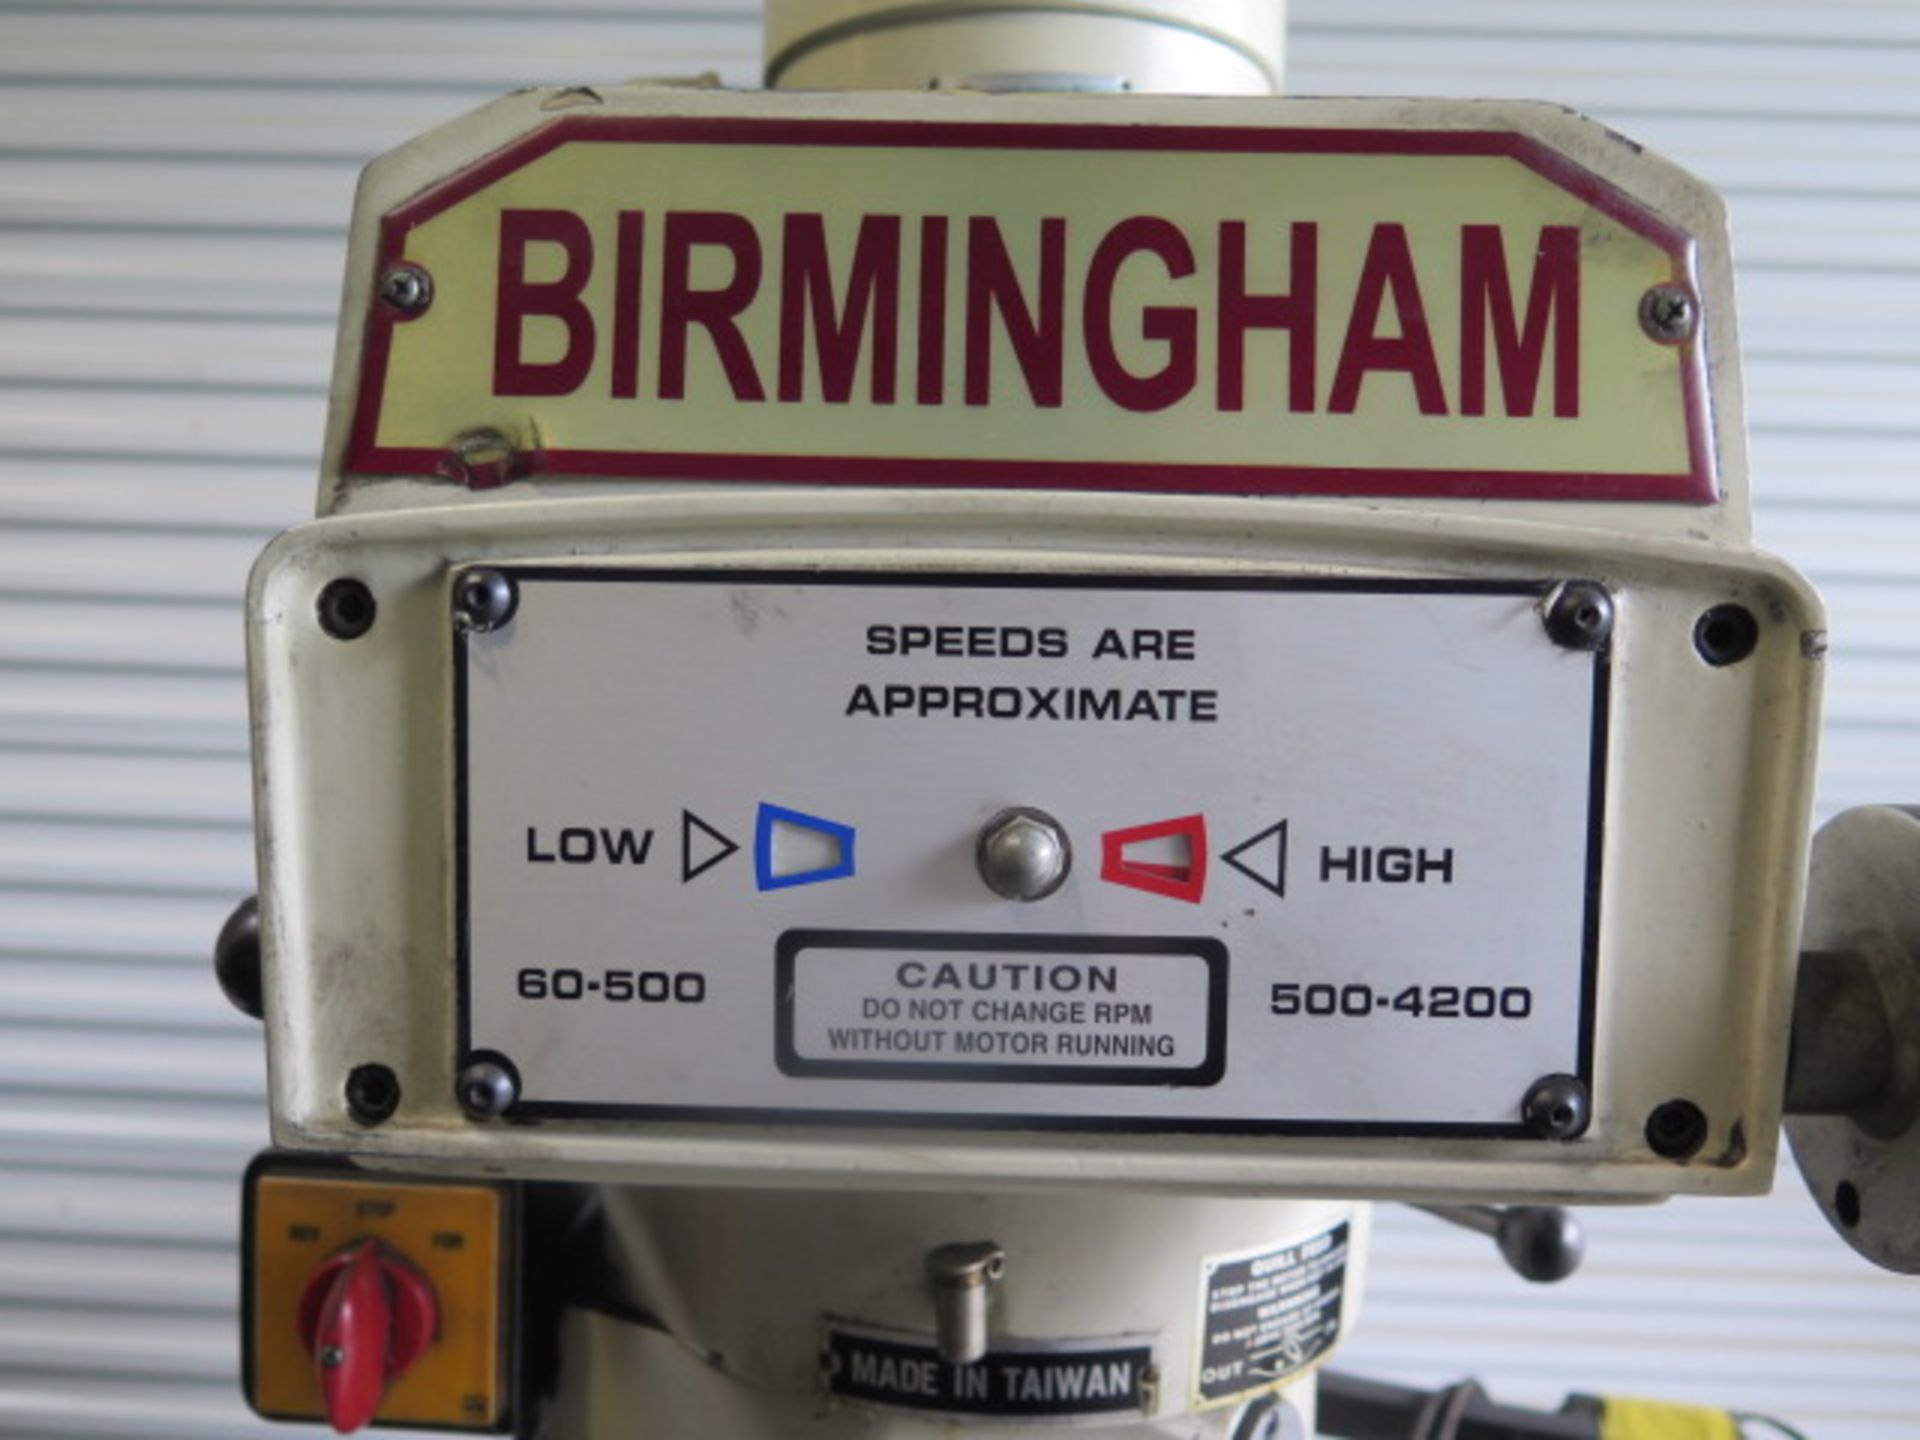 2006 Birmingham X6323A Vertical Mill s/n 063416 w/ Newall C80 Programmable DRO, 3Hp Motor,SOLD AS IS - Image 10 of 11